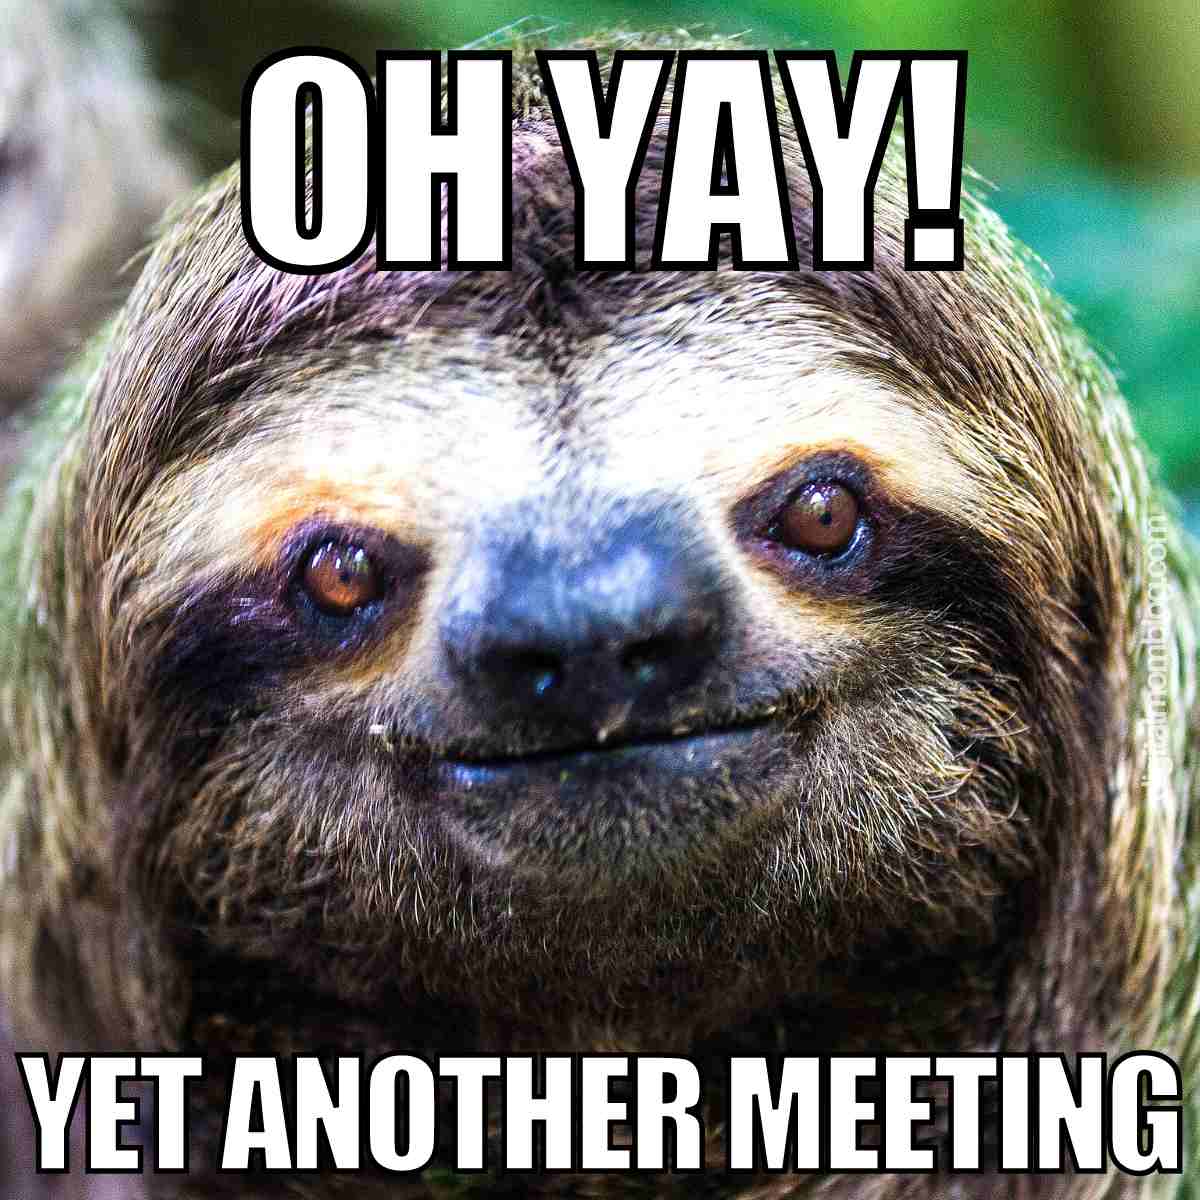 50+ Hilarious Meeting Memes for Every Workplace Scenario